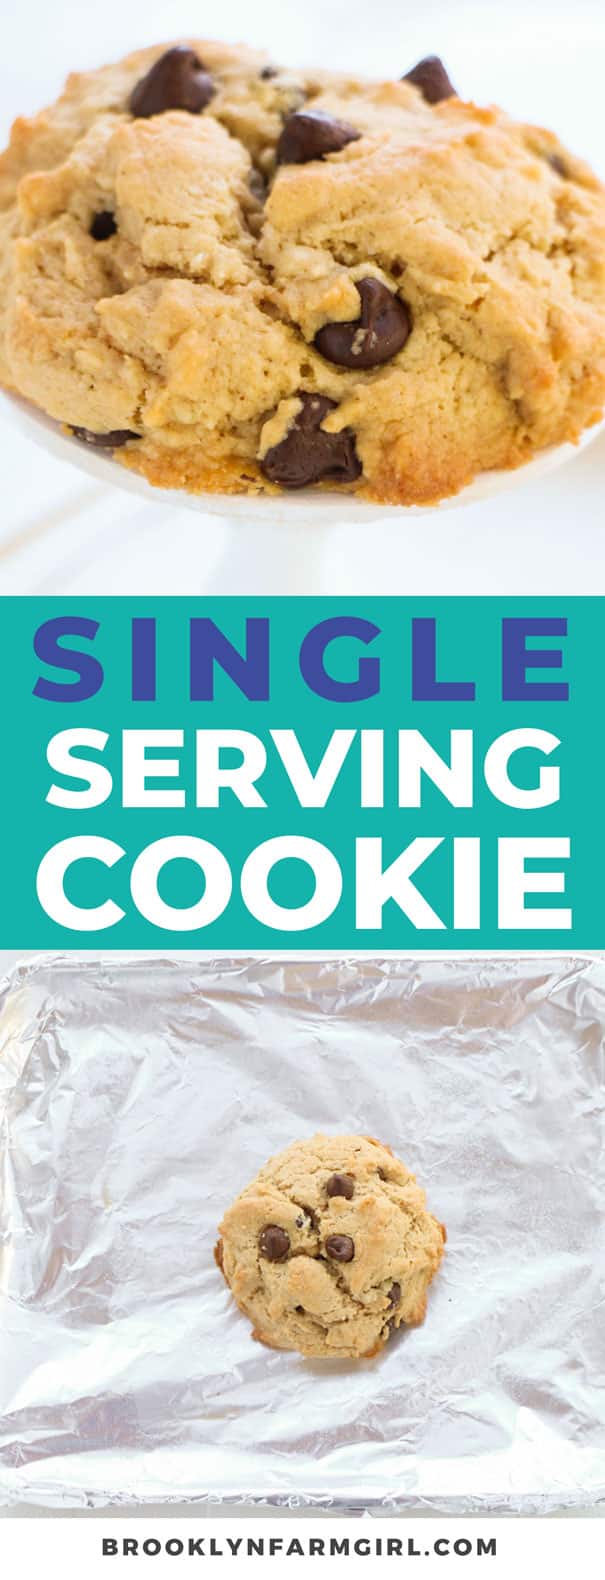 This delicious Single Serving Chocolate Chip Cookie recipe is the perfect little treat. This peanut butter chocolate chip one cookie recipe is thick, soft and chewy. My go-to for late night snacking when the cookie craving hits.